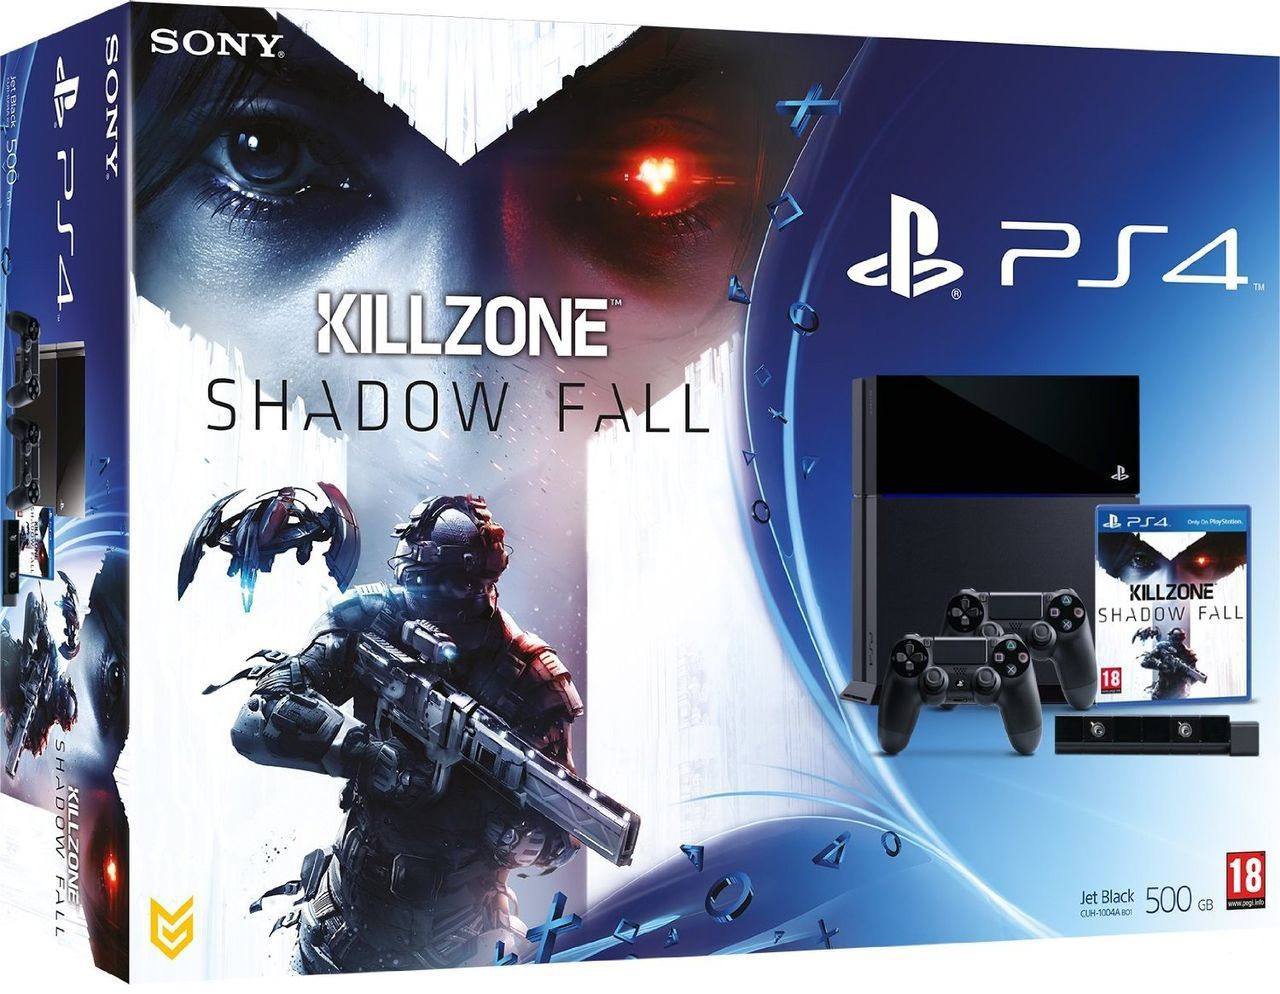 ps4 with killzone shadow fall and camera mega bundle coming to uk for 450 image 1